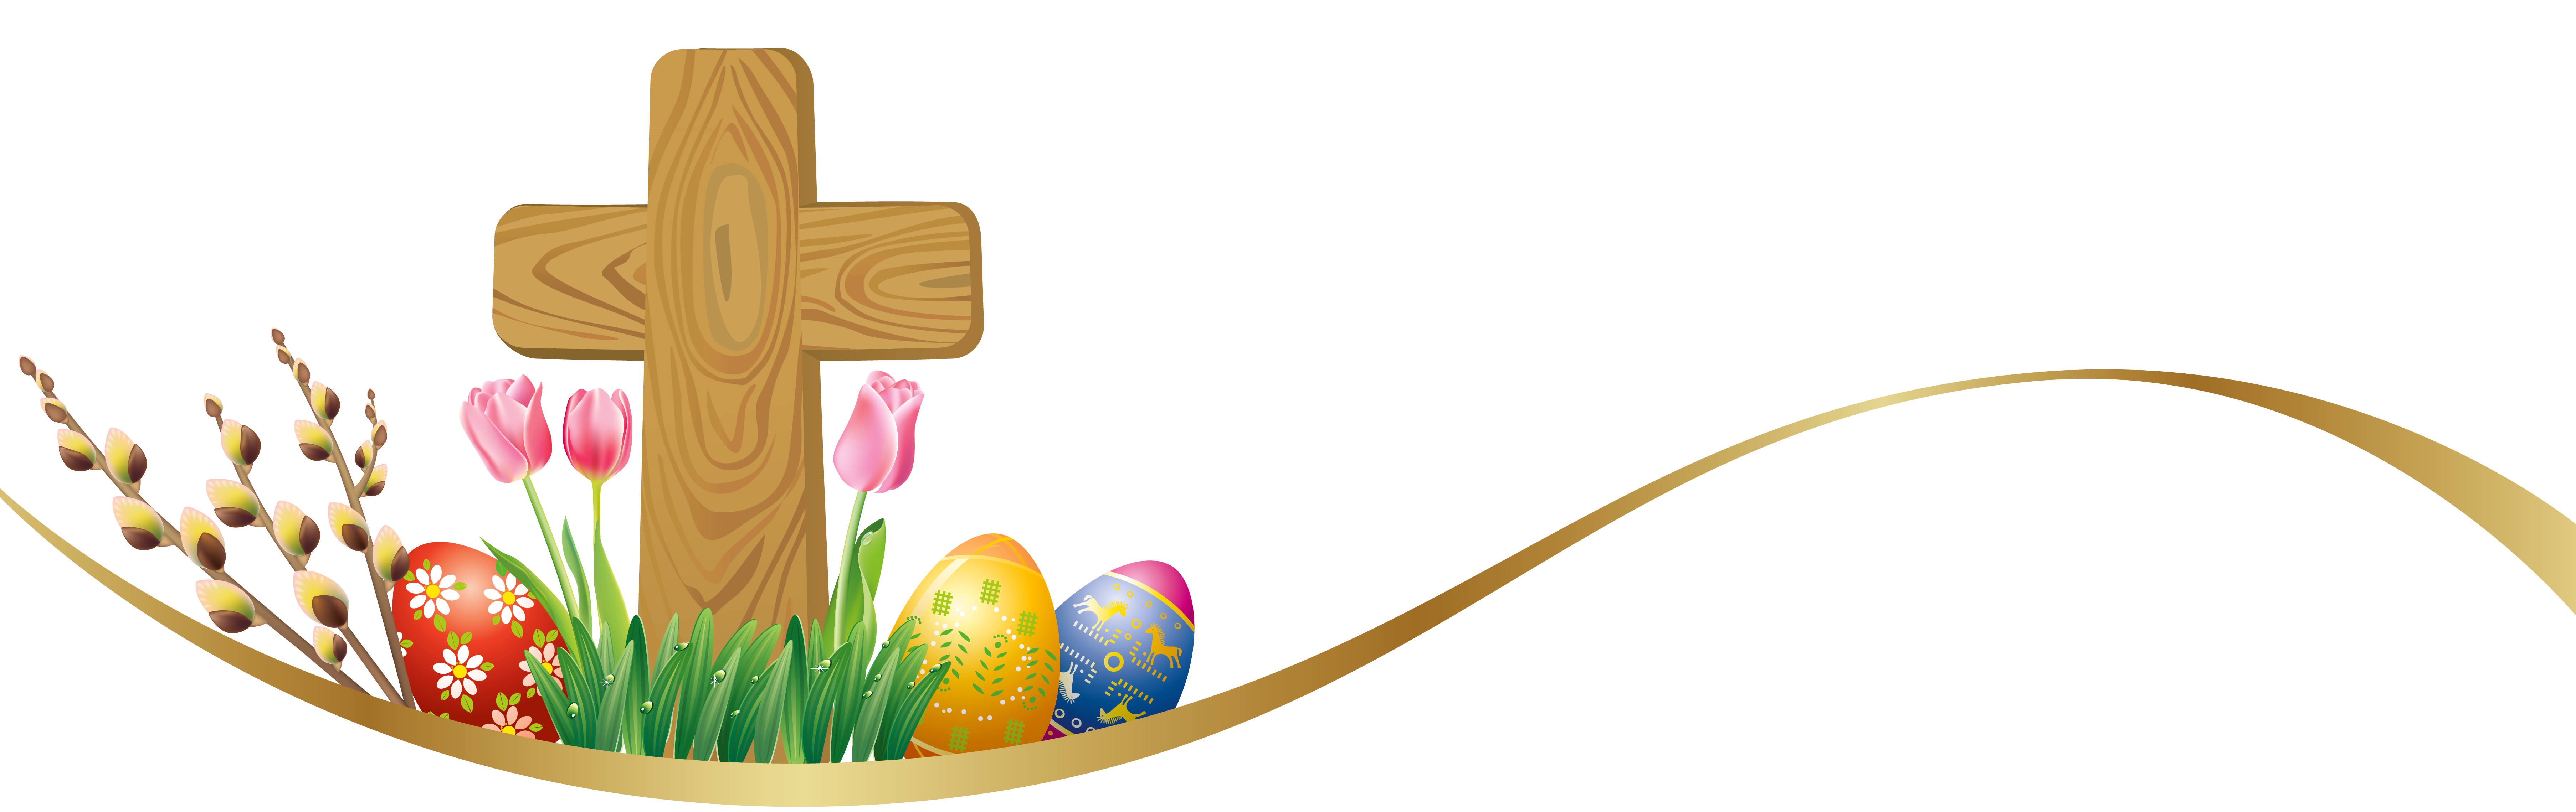 free easter banner clipart - photo #50